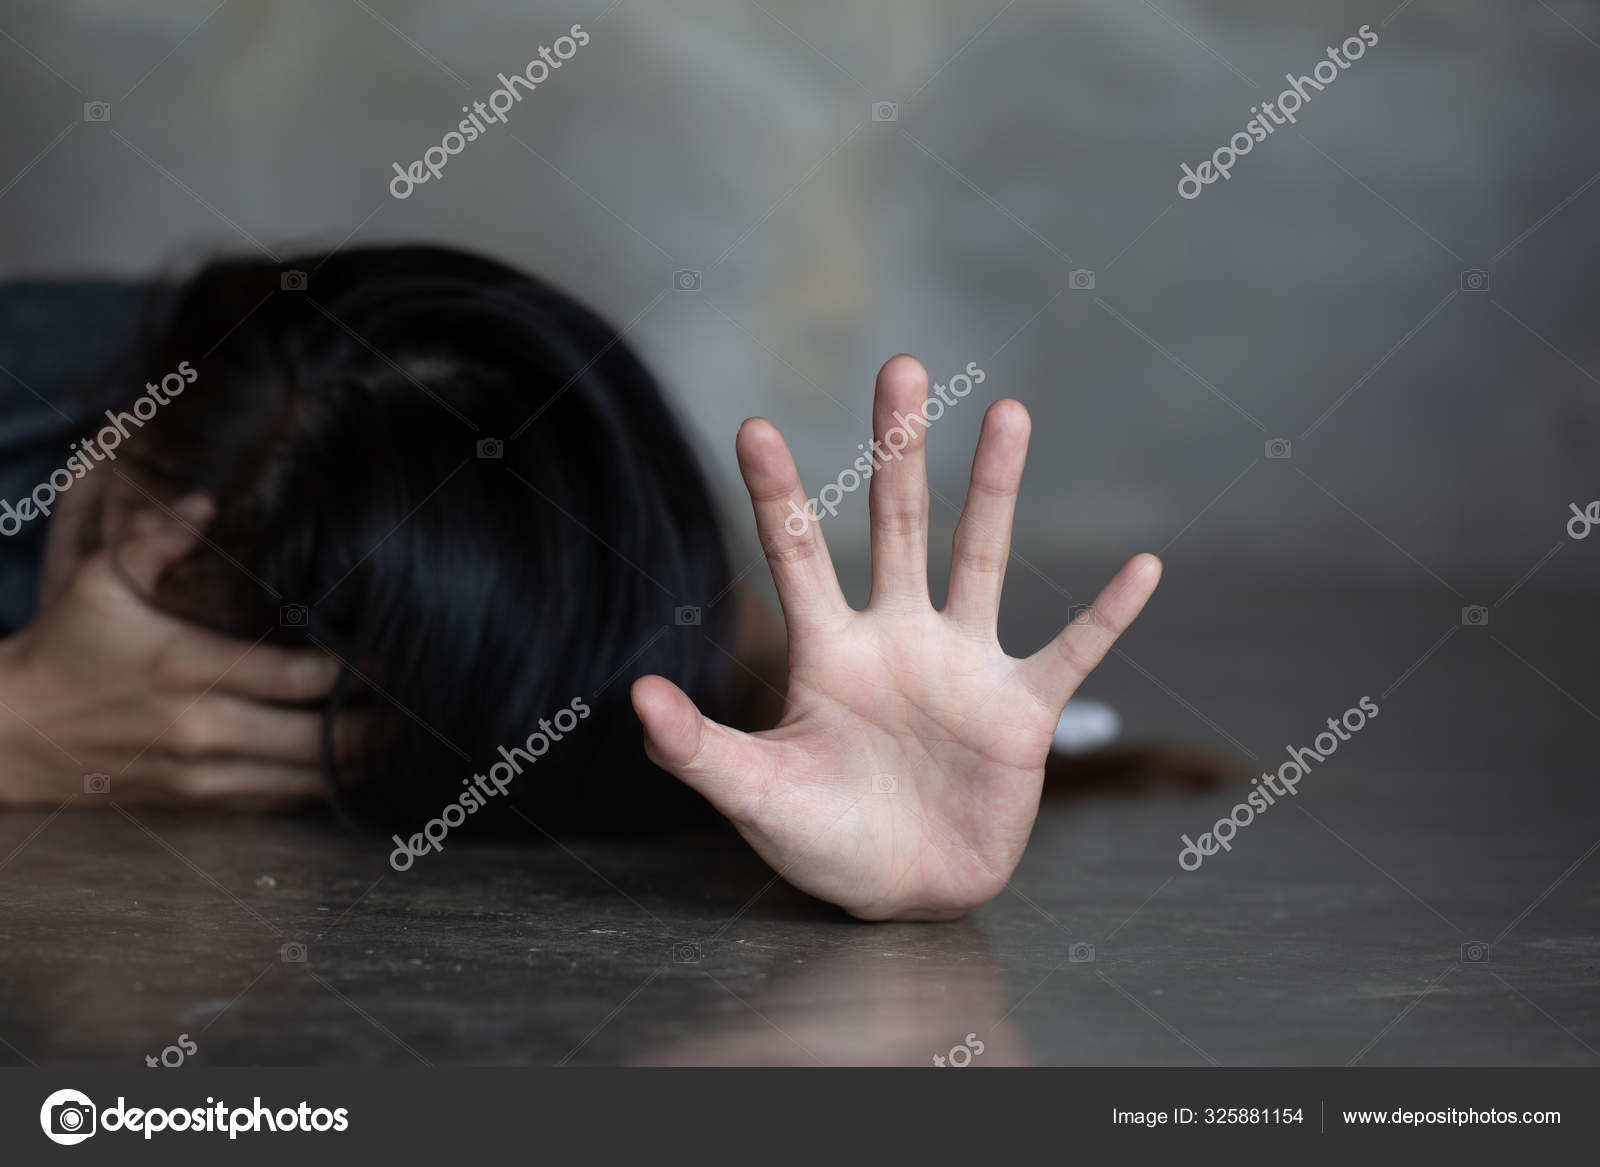 despair rape victim waiting for help, Stop sexual harassment and violence  against women, rape and sexual abuse concept. Stock Photo